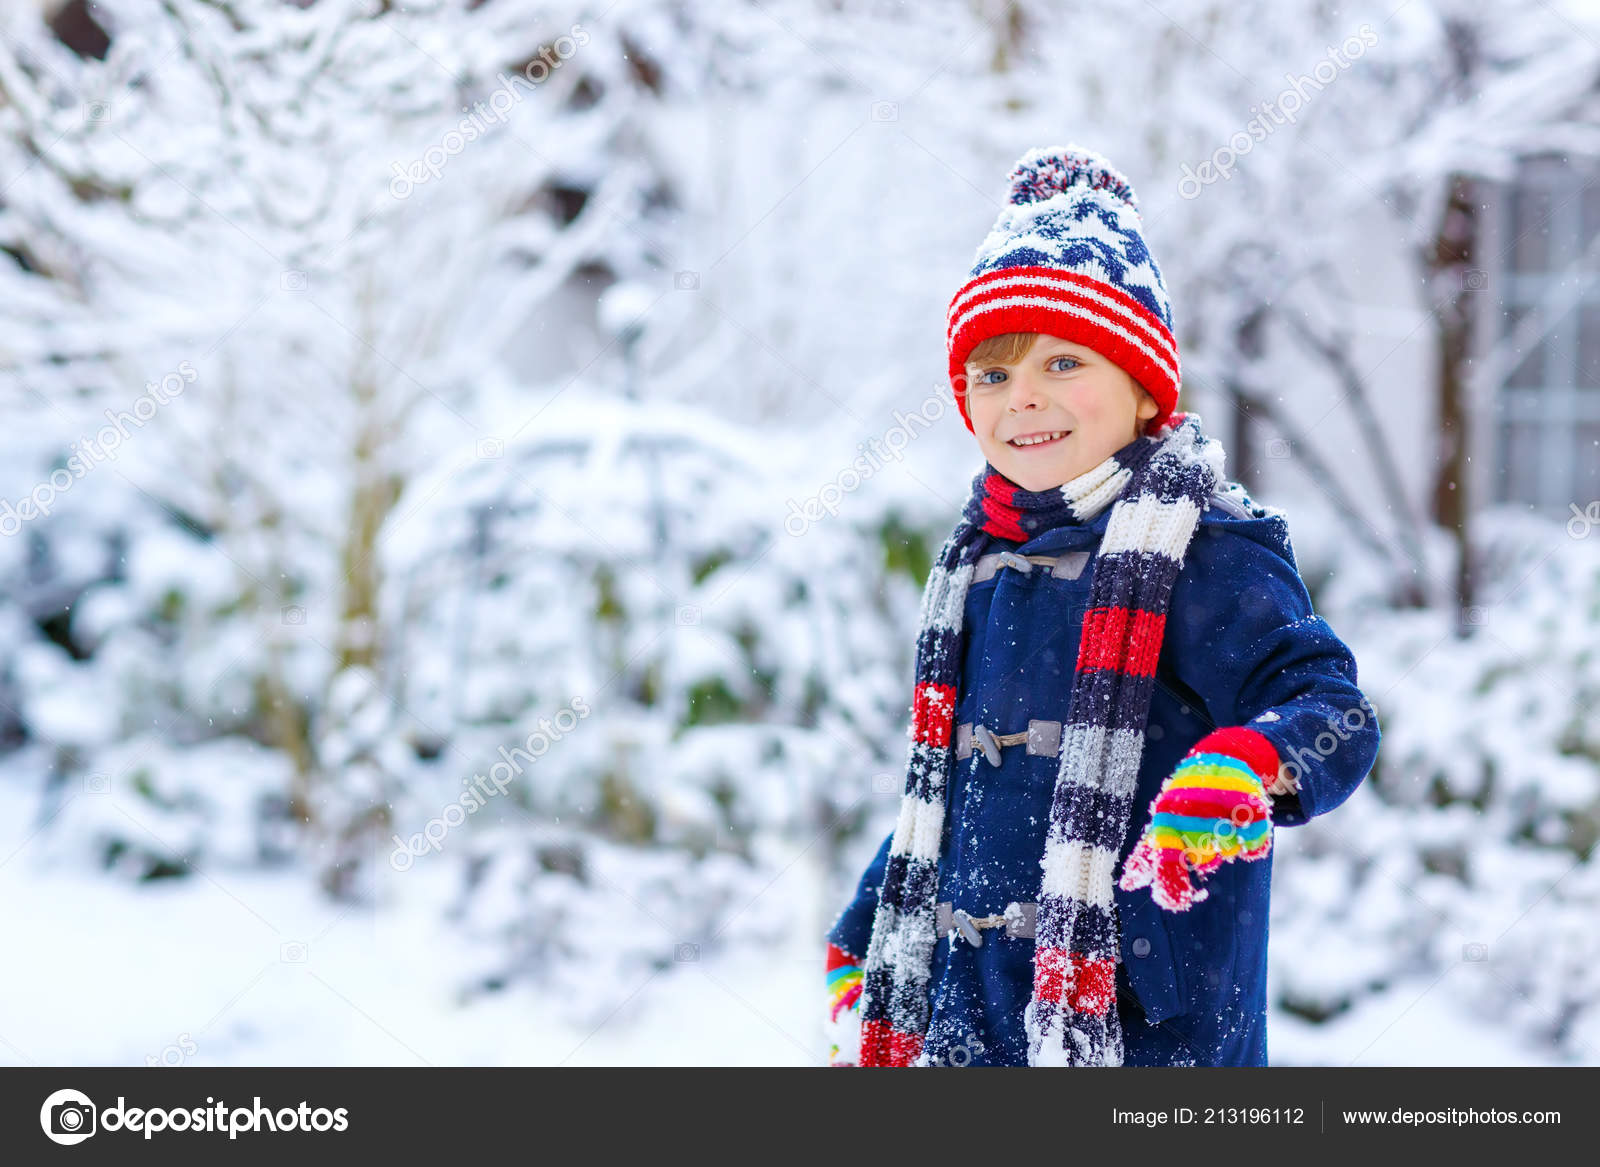 Cute little funny child in colorful winter fashion clothes having